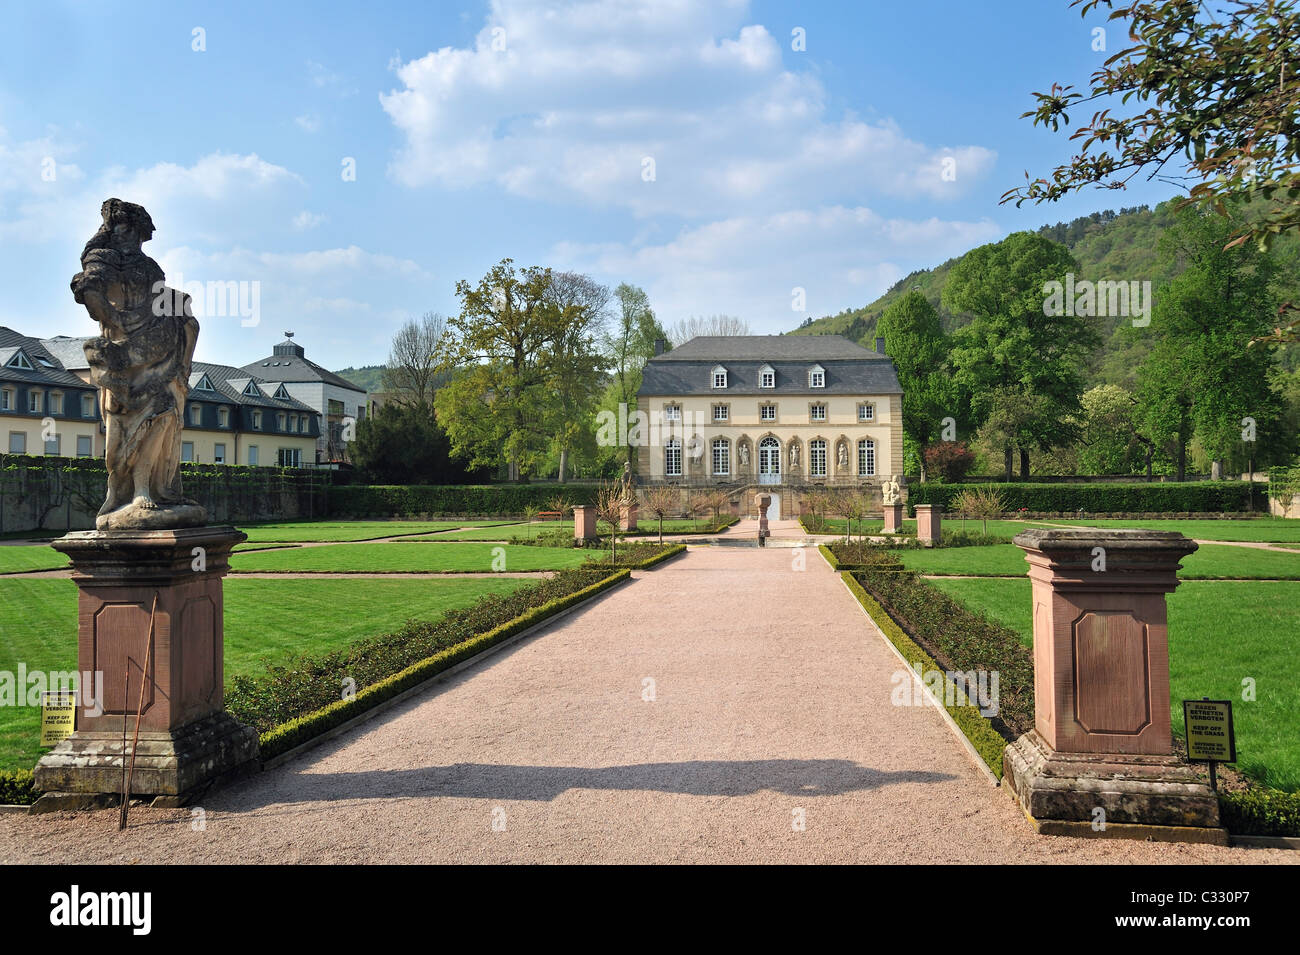 Abbey's garden and orangery at Echternach, Grand Duchy of Luxembourg Stock Photo